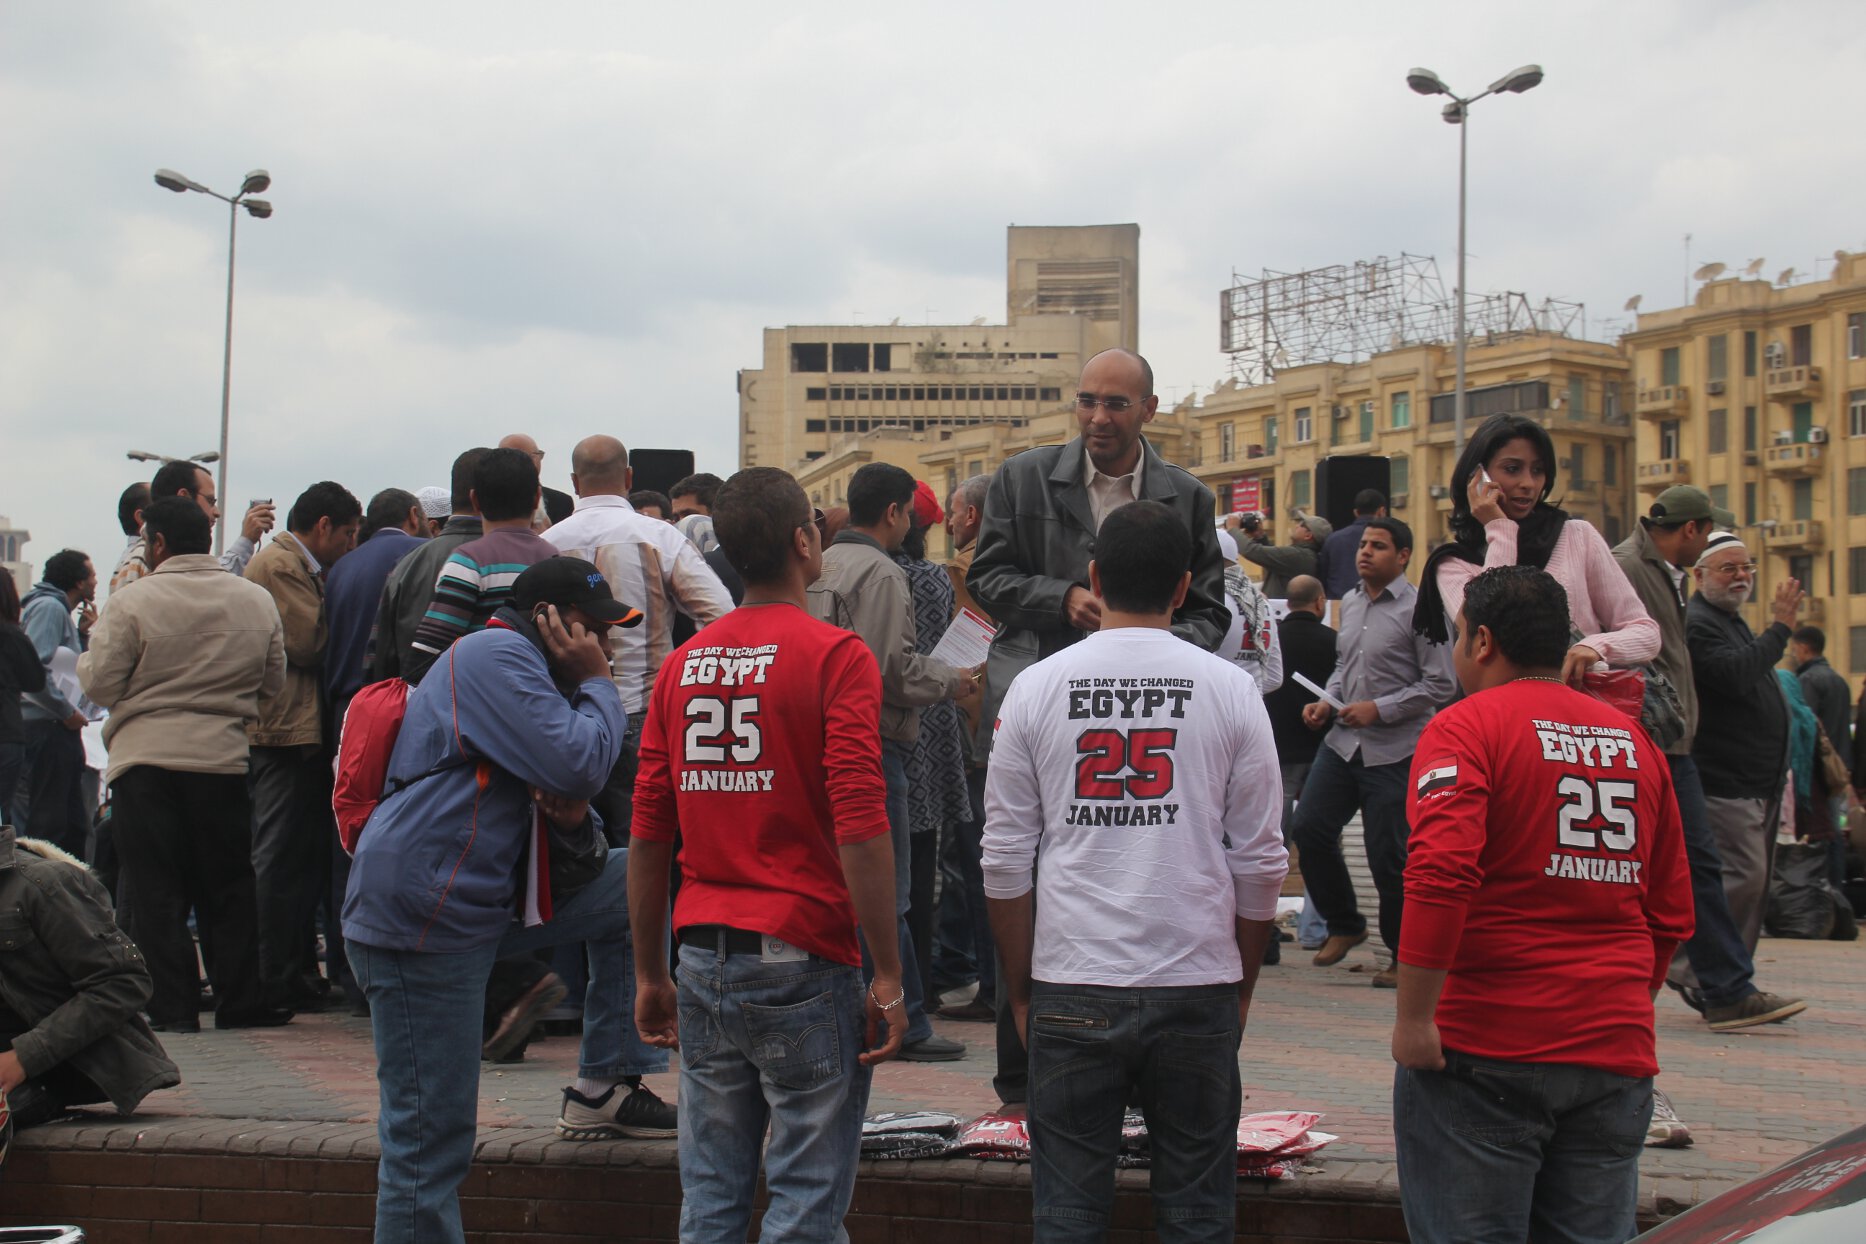 Demonstrators sell "The Day We Changed" T-shirts while protesters gather in Cairo's Tahrir Square.